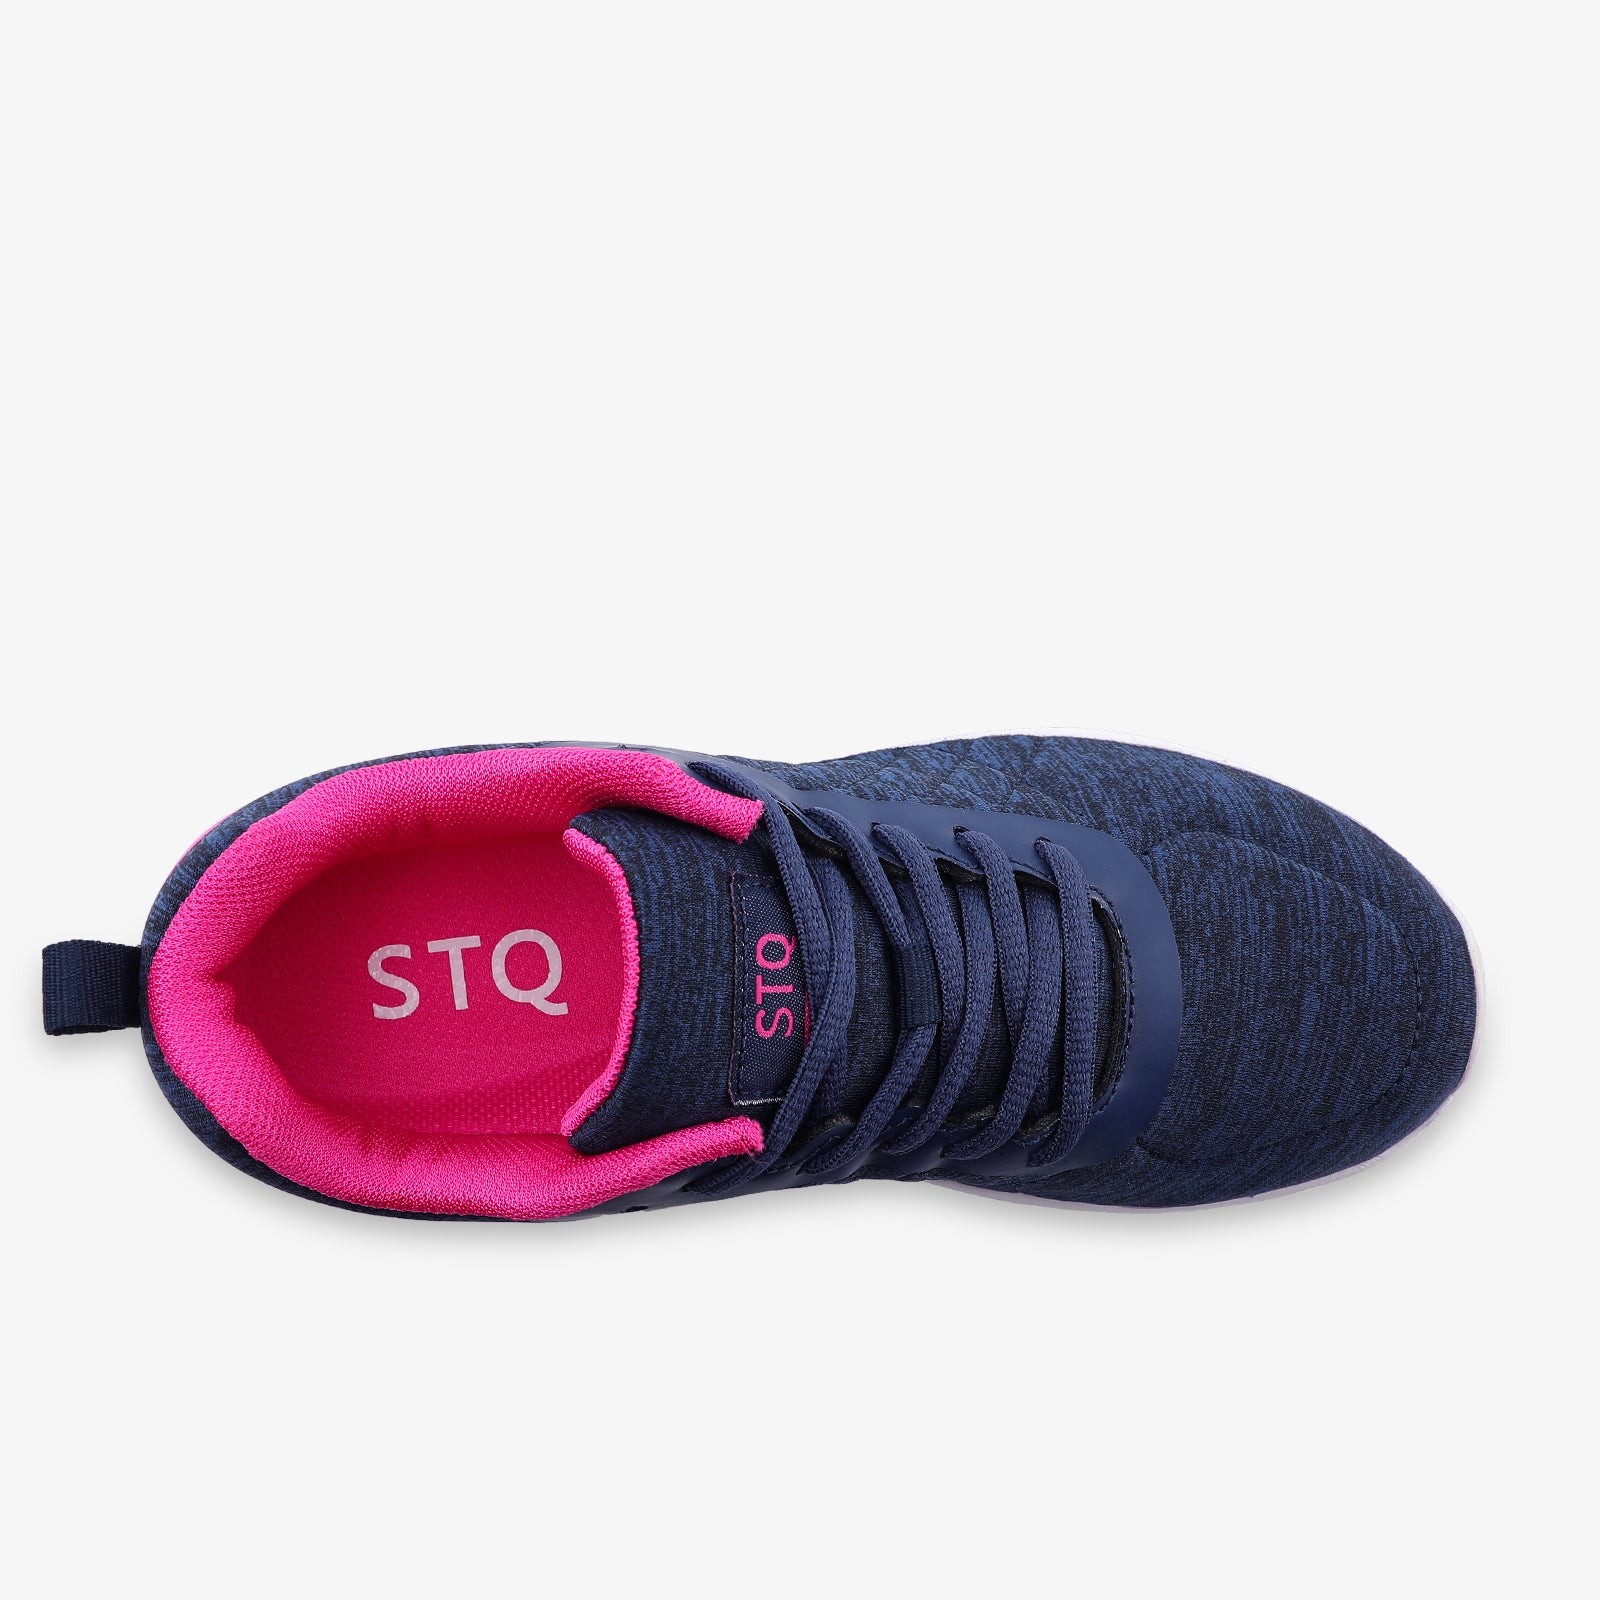 stq-lace-up-running-shoes-lightweight-sneakers-view